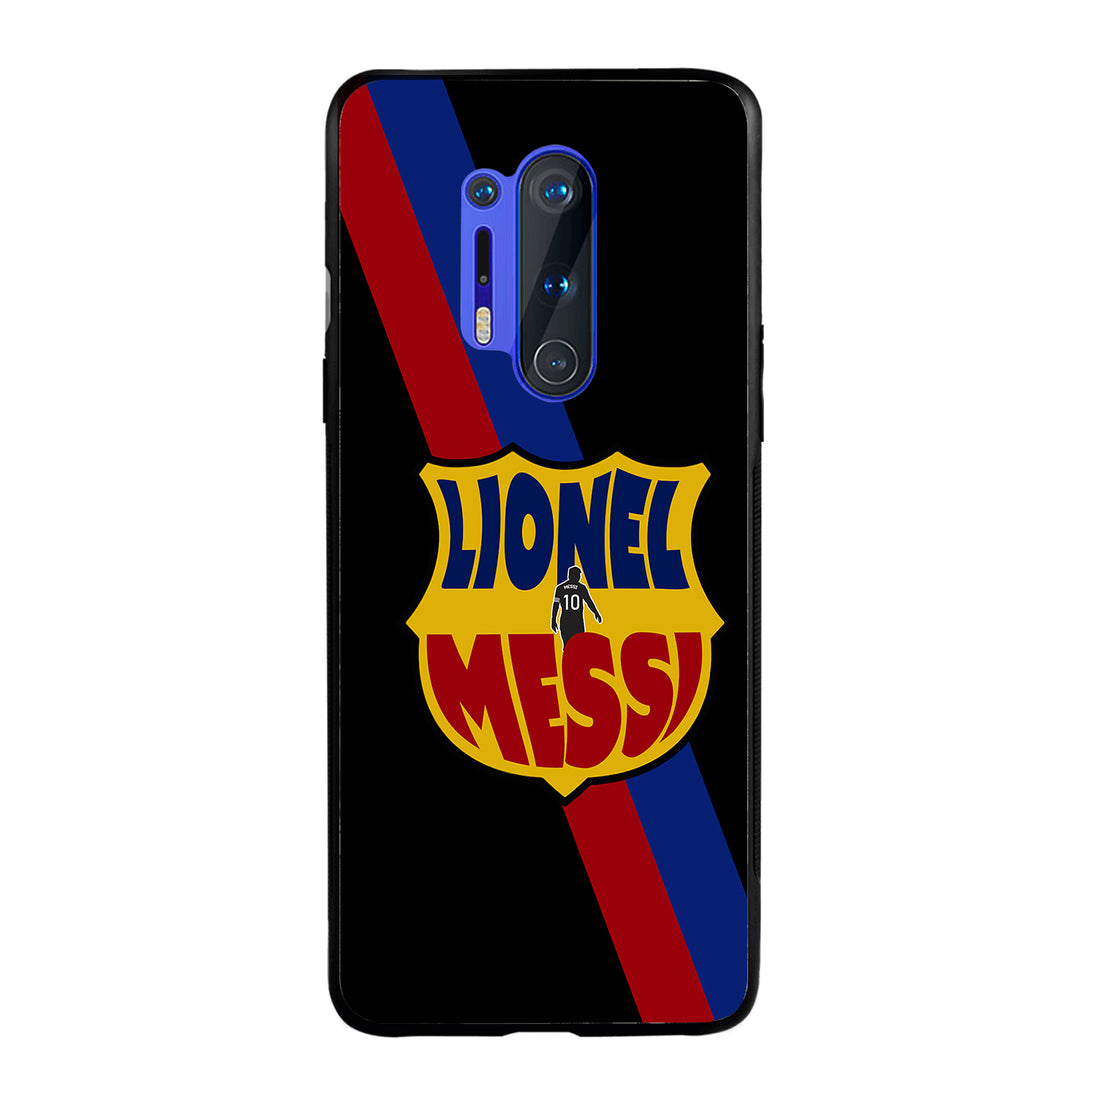 Lionel Messi Sports Oneplus 8 pro Back Case